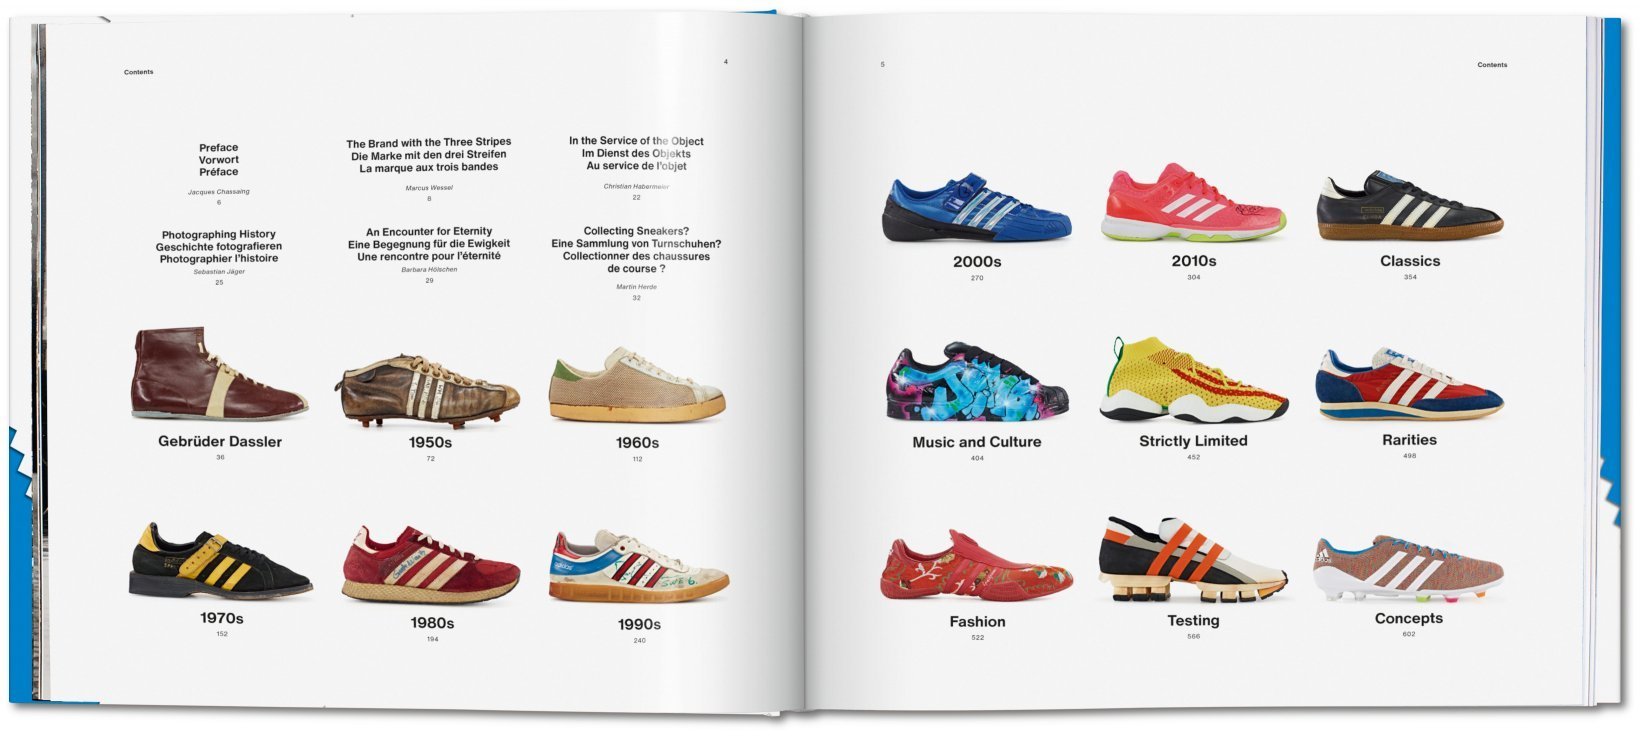 Thrills: The history of the adidas shoe, its earliest beginnings until | Papercut